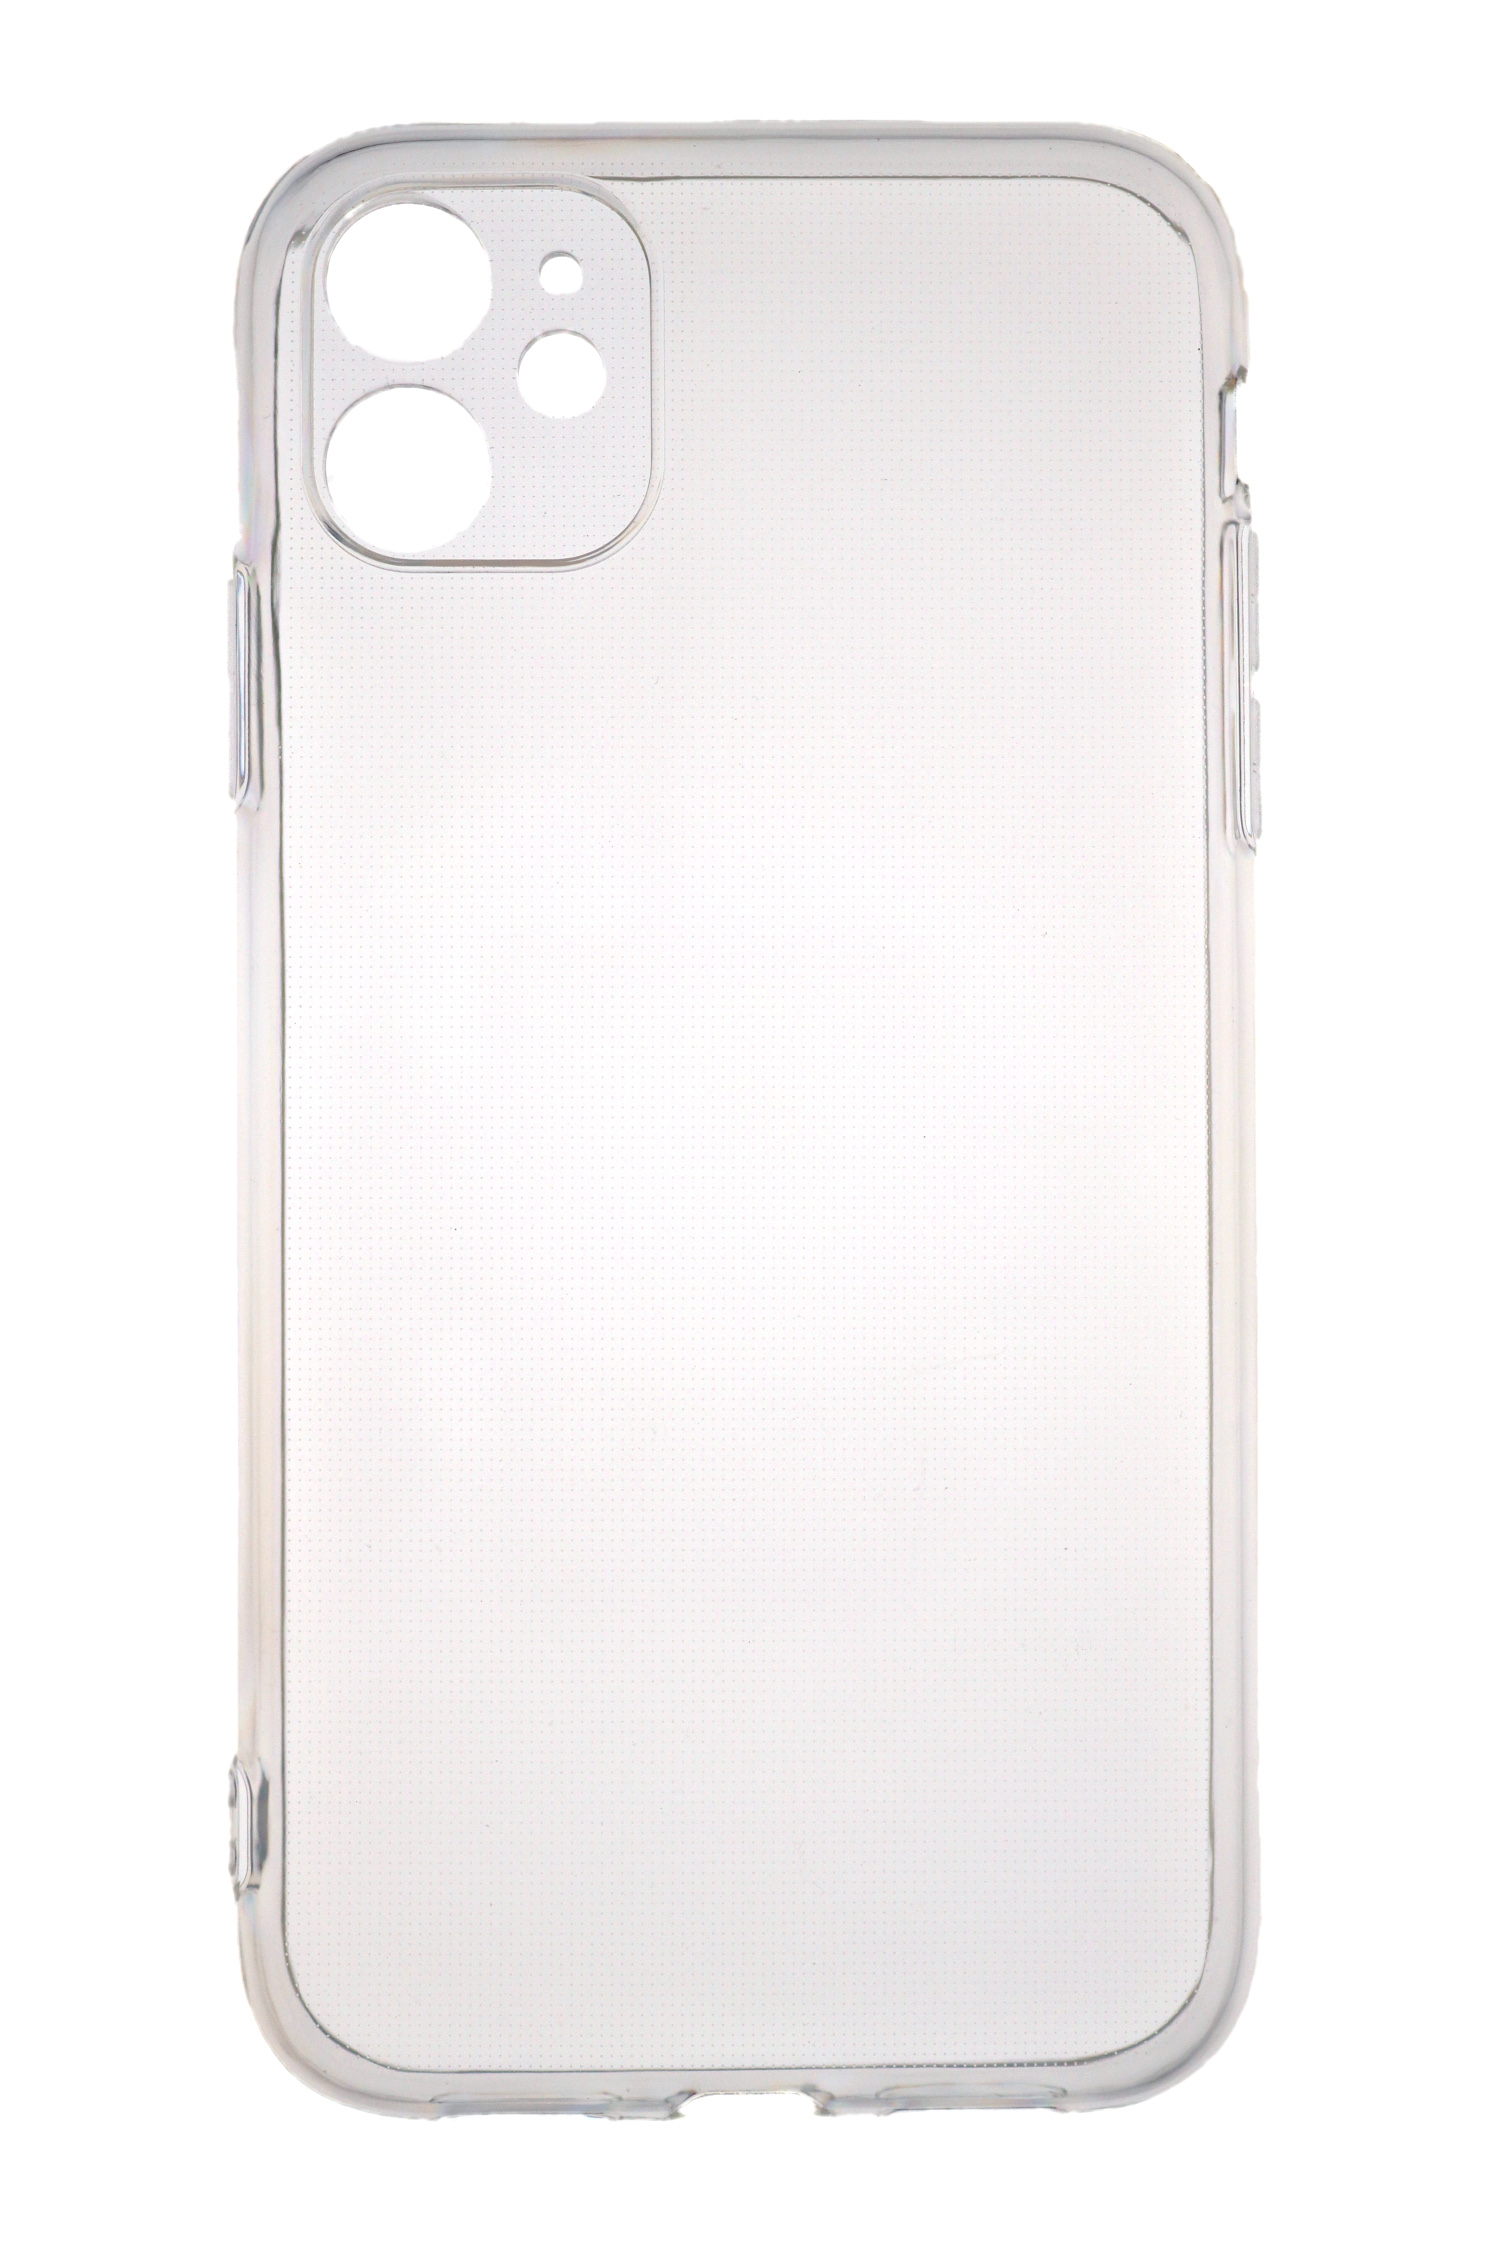 JAMCOVER 2.0 12 mm mini, Backcover, Strong, TPU iPhone Case Apple, Transparent